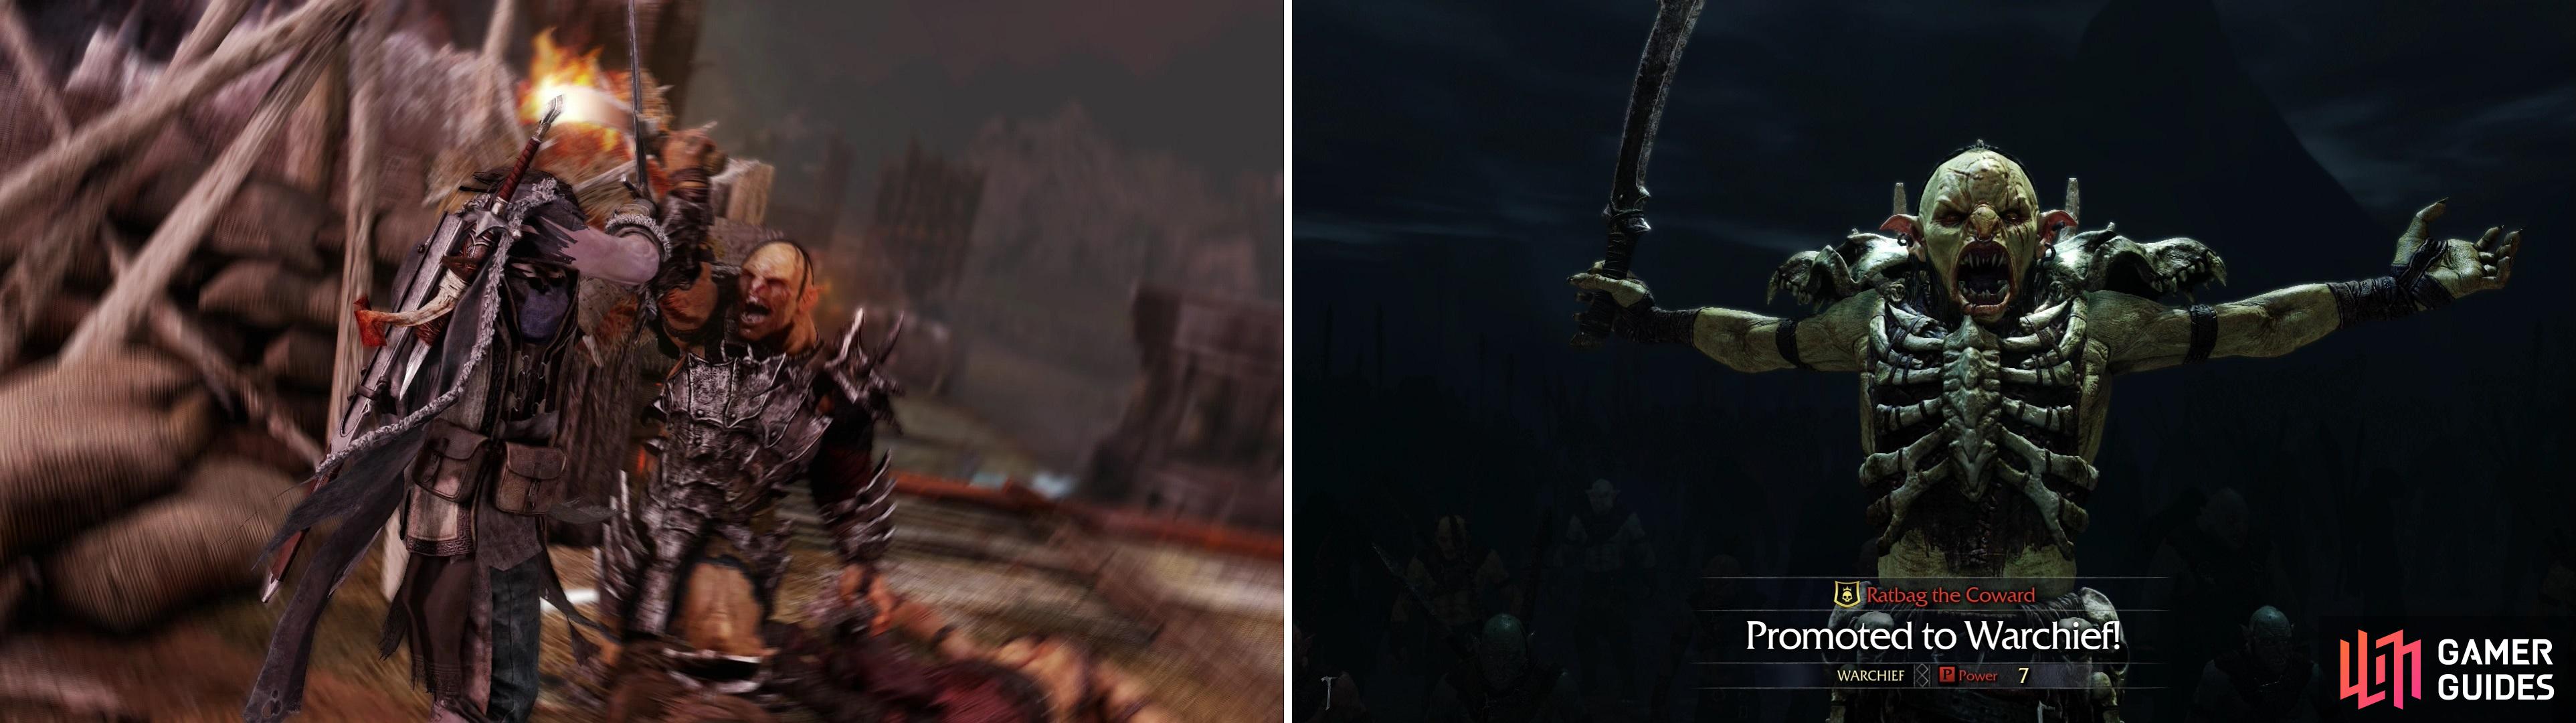 Kill the Warchief Mogg (left) and Ratbag will fulfill his long-desired goal of becoming a Warchief (right).